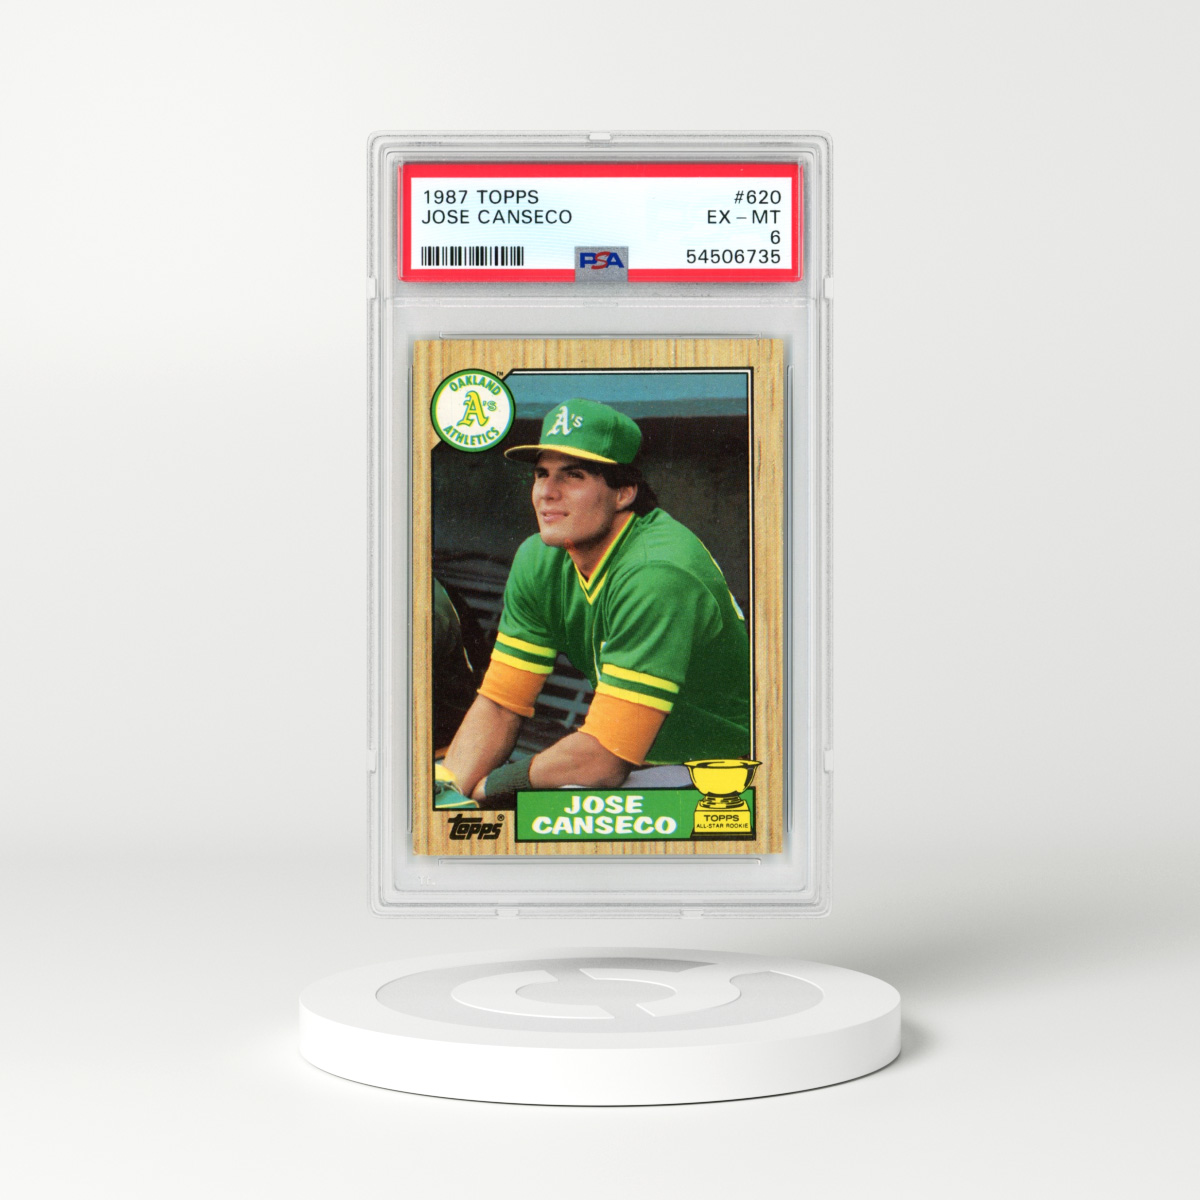 Oakland Athletics/Complete 2020 Topps A's Baseball Team Set! (26 Cards)  Series 1 and 2! Plus Bonus Cards of Jose Canseco and Mark McGwire!